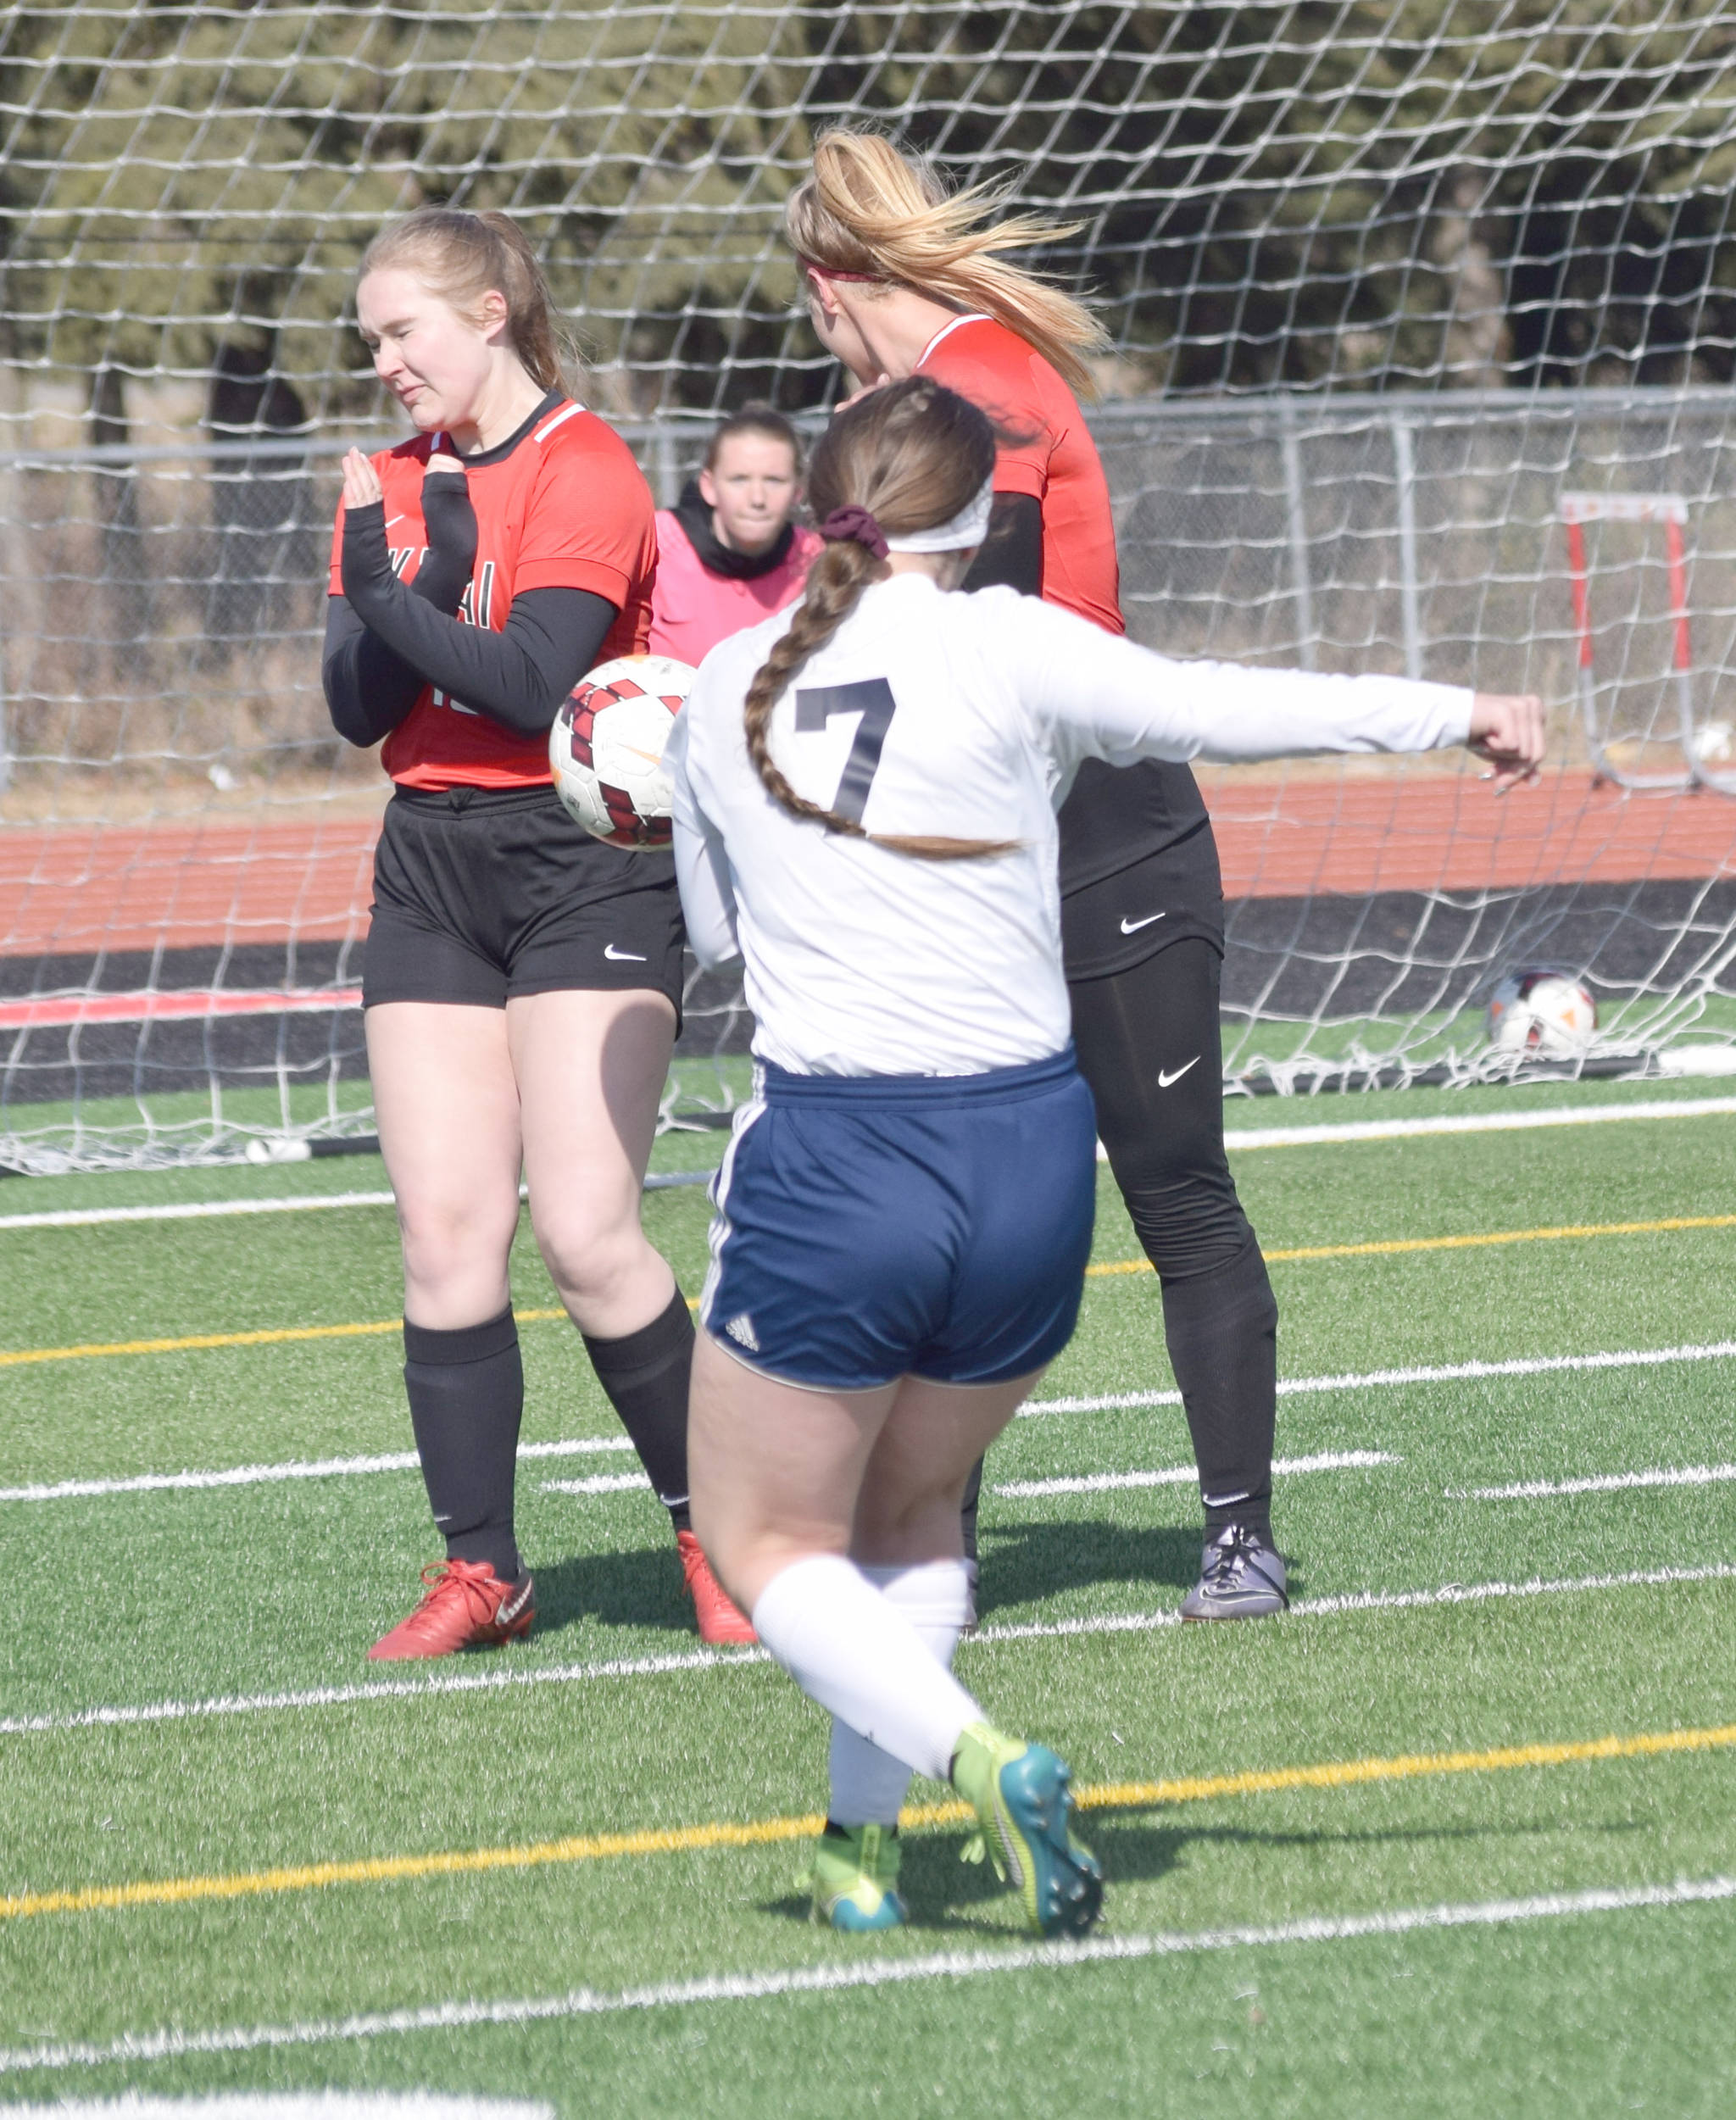 Julia Hanson of Kenai Central blocks the shot of Soldotna’s Journey Miller on Monday, April 22, 2019, at Ed Hollier Field at Kenai Central High School in Kenai, Alaska. Anya Danielson is in the wall with Hanson, while Kailey Hamilton is in net. (Photo by Jeff Helminiak)